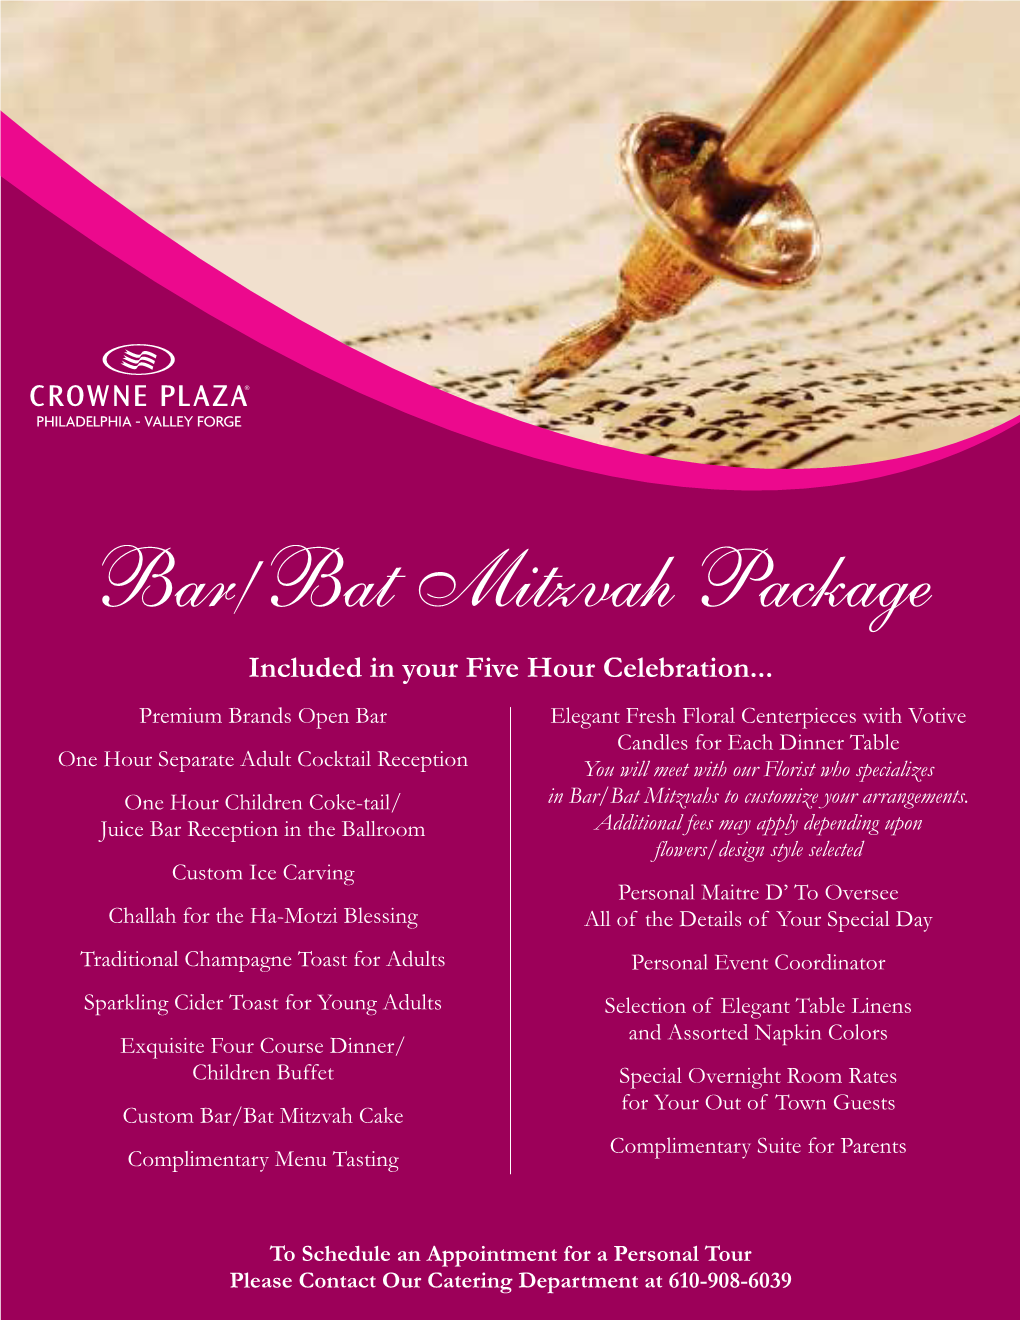 Bar/Bat Mitzvah Package Included in Your Five Hour Celebration